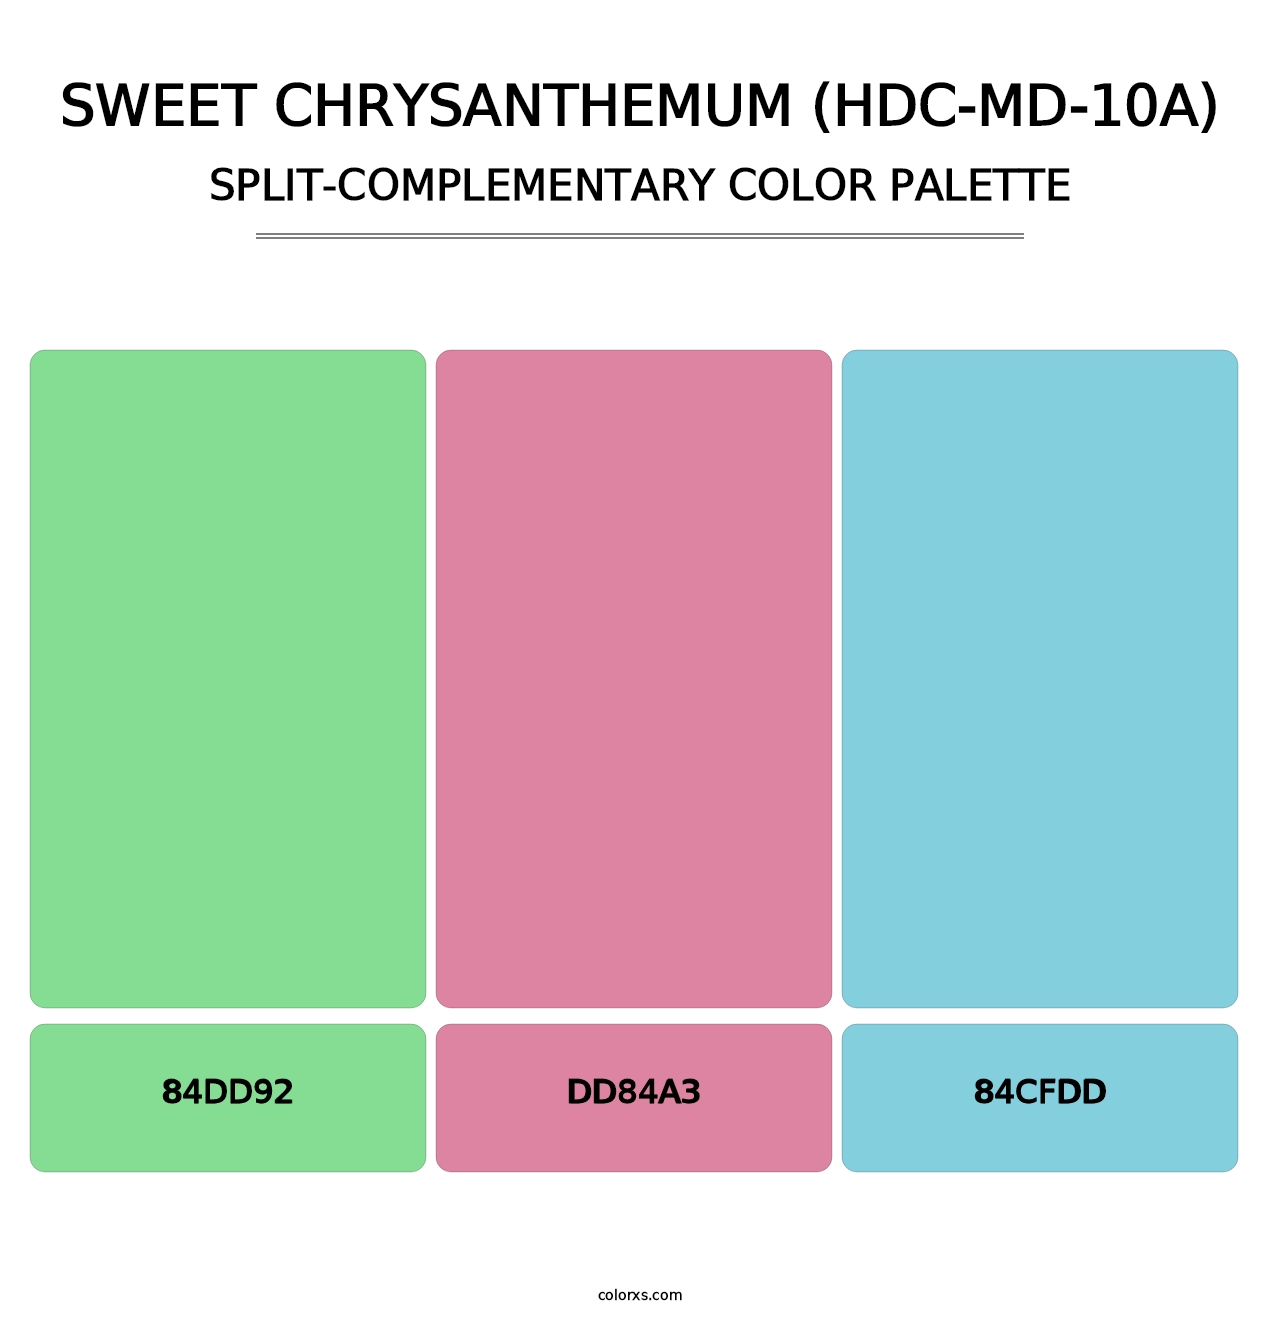 Sweet Chrysanthemum (HDC-MD-10A) - Split-Complementary Color Palette